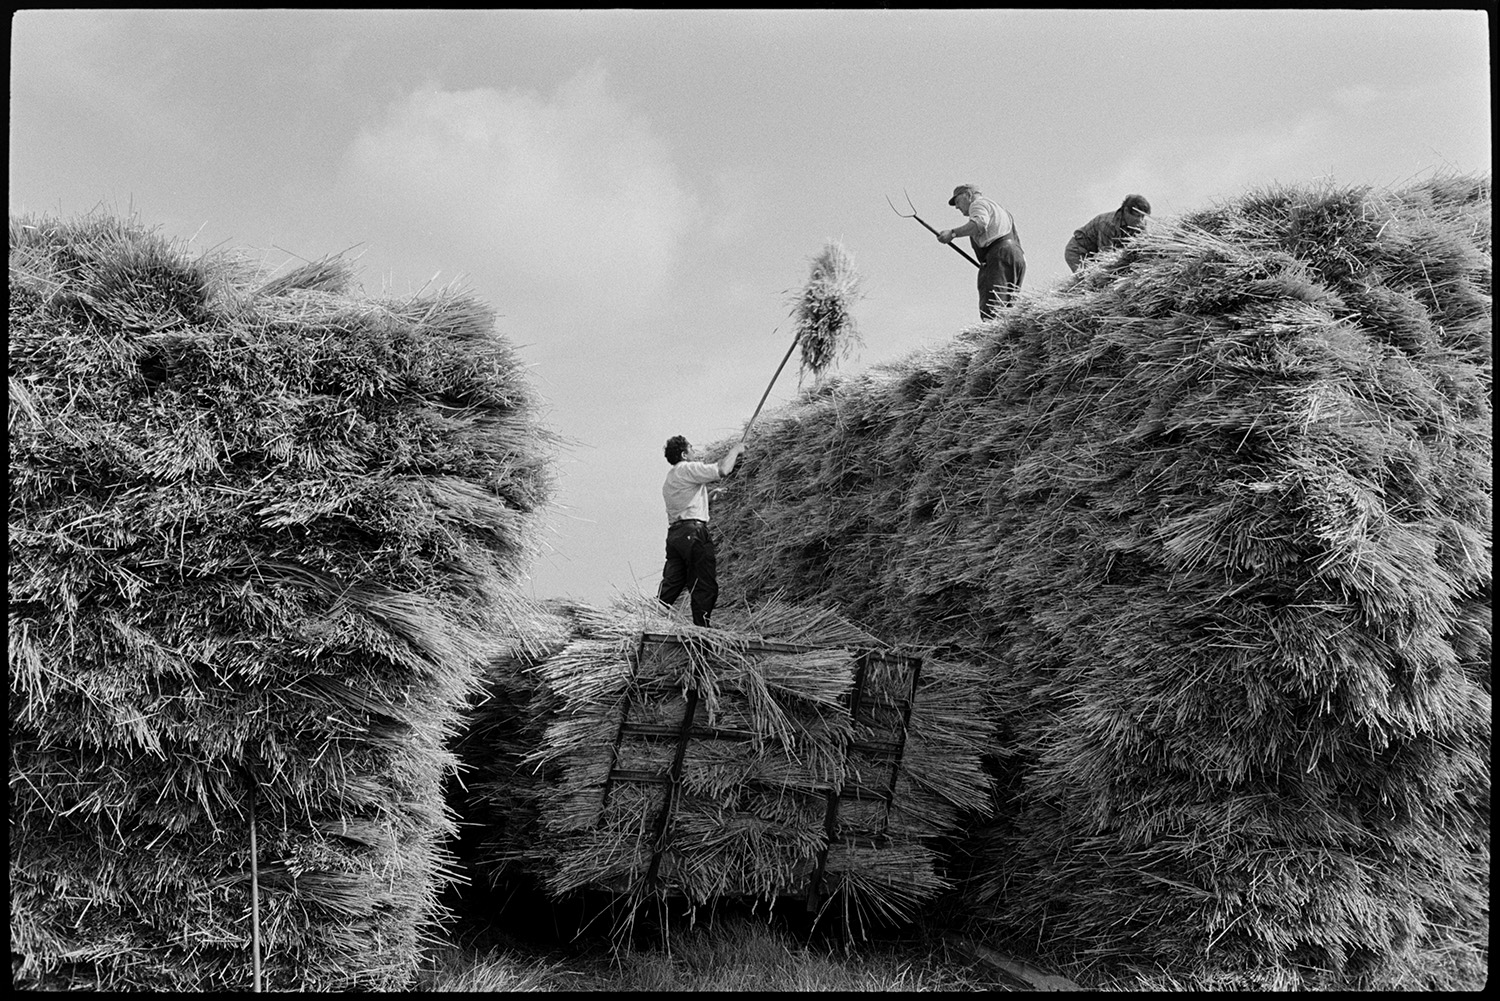 Farmers building wheat rick of thatching reed.
[Farmers building a square wheat rick of thatching reed in a field at Riddlecombe. A man is lifting the reed off a trailer using a pitchfork and passing it to two other men building the rick.]